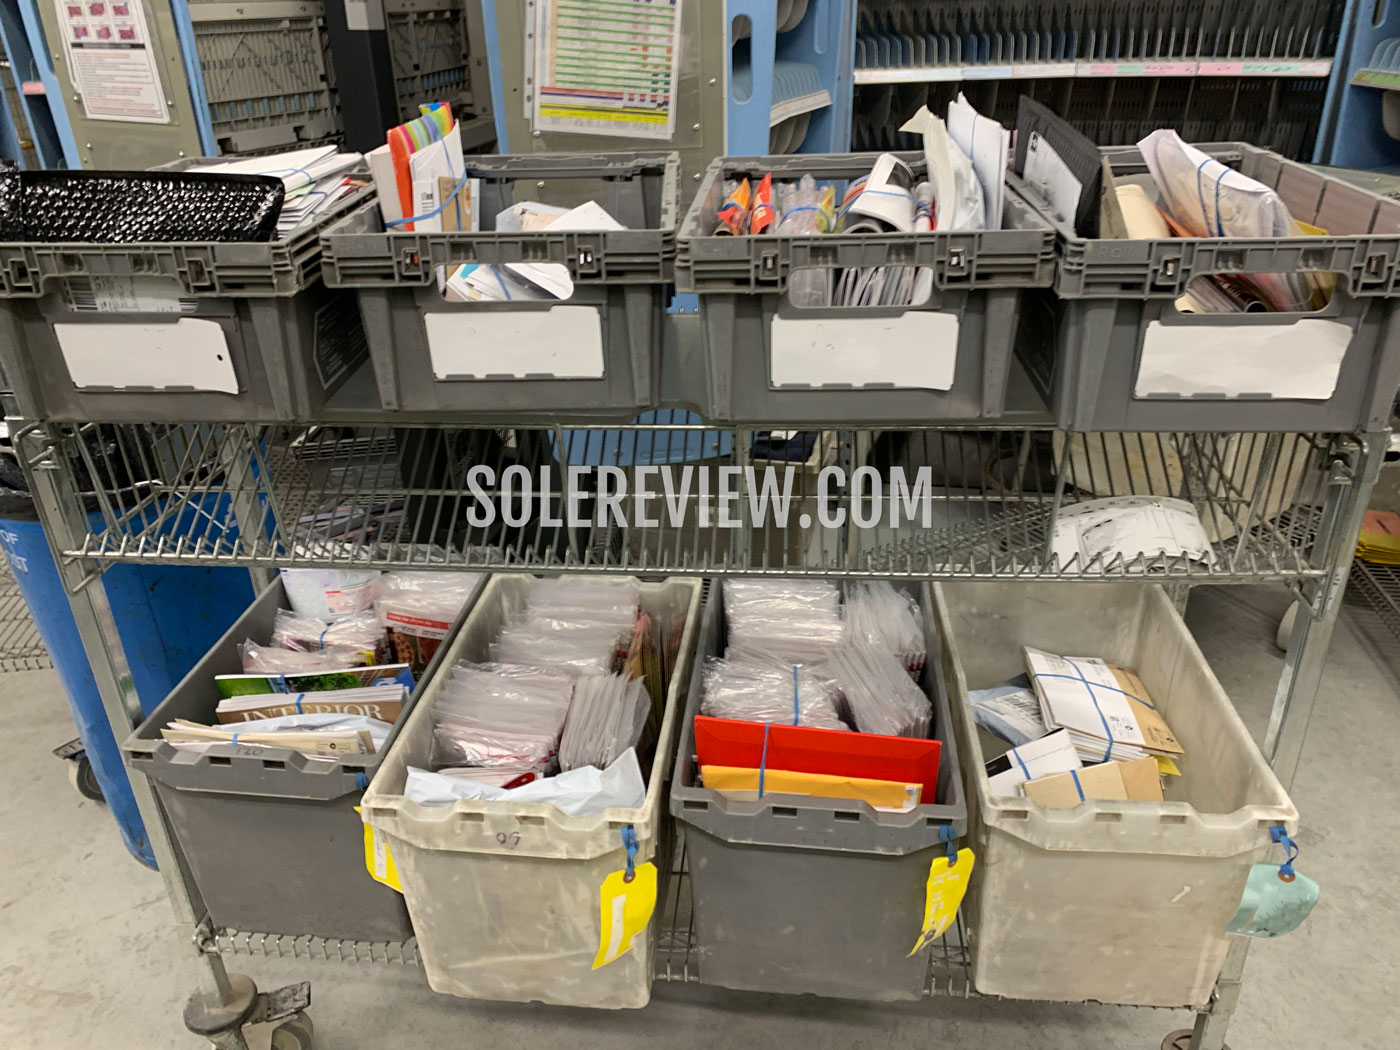 Mail sorting at postal and delivery station.